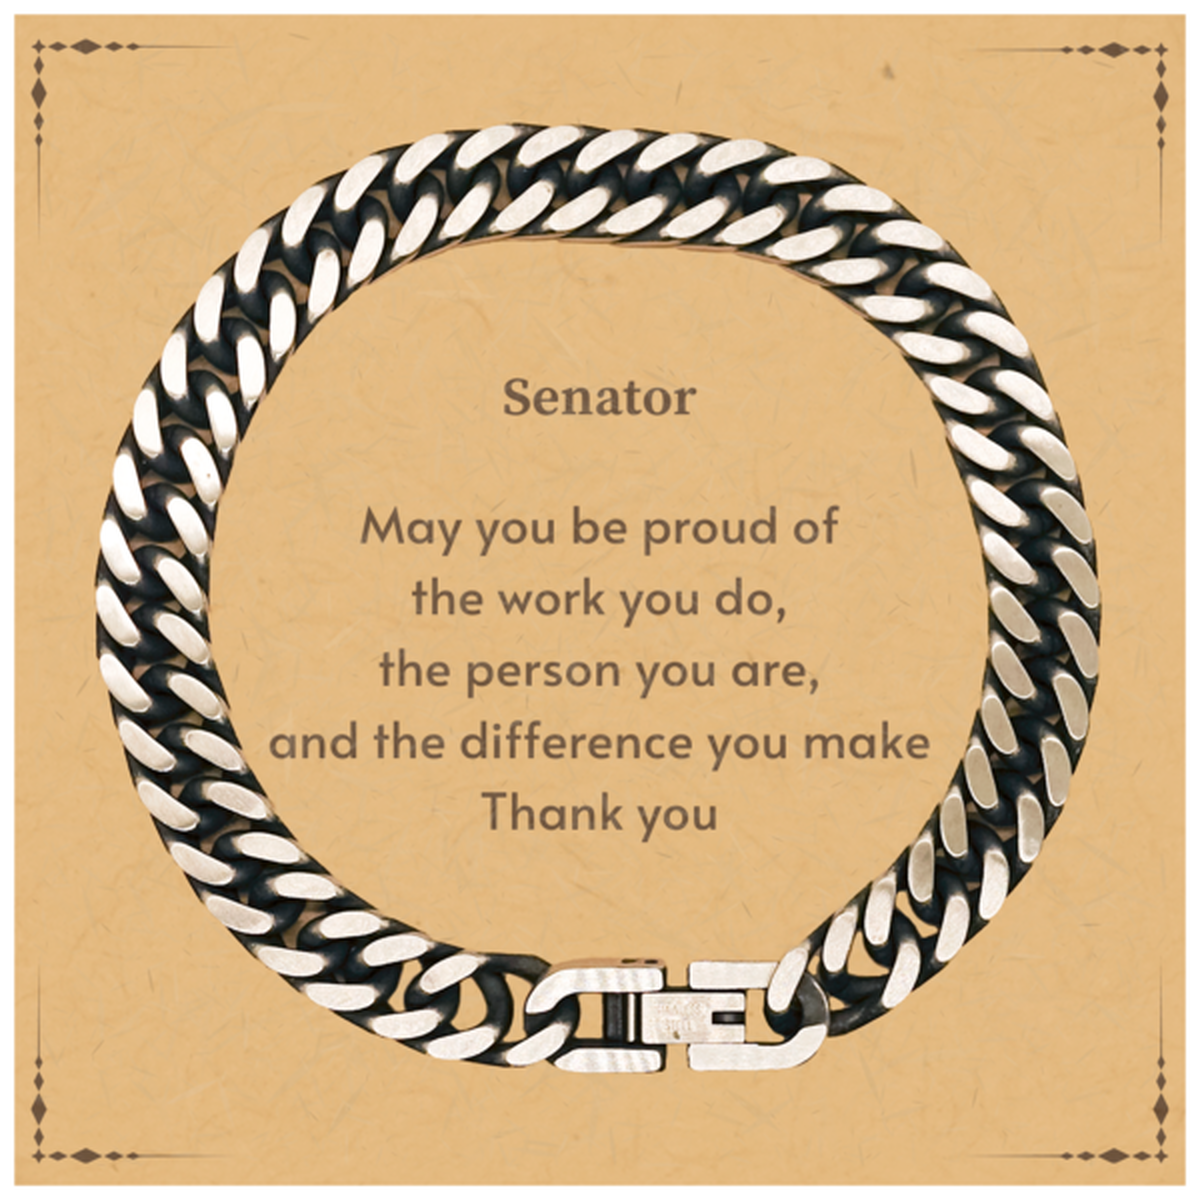 Heartwarming Cuban Link Chain Bracelet Retirement Coworkers Gifts for Senator, Senator May You be proud of the work you do, the person you are Gifts for Boss Men Women Friends